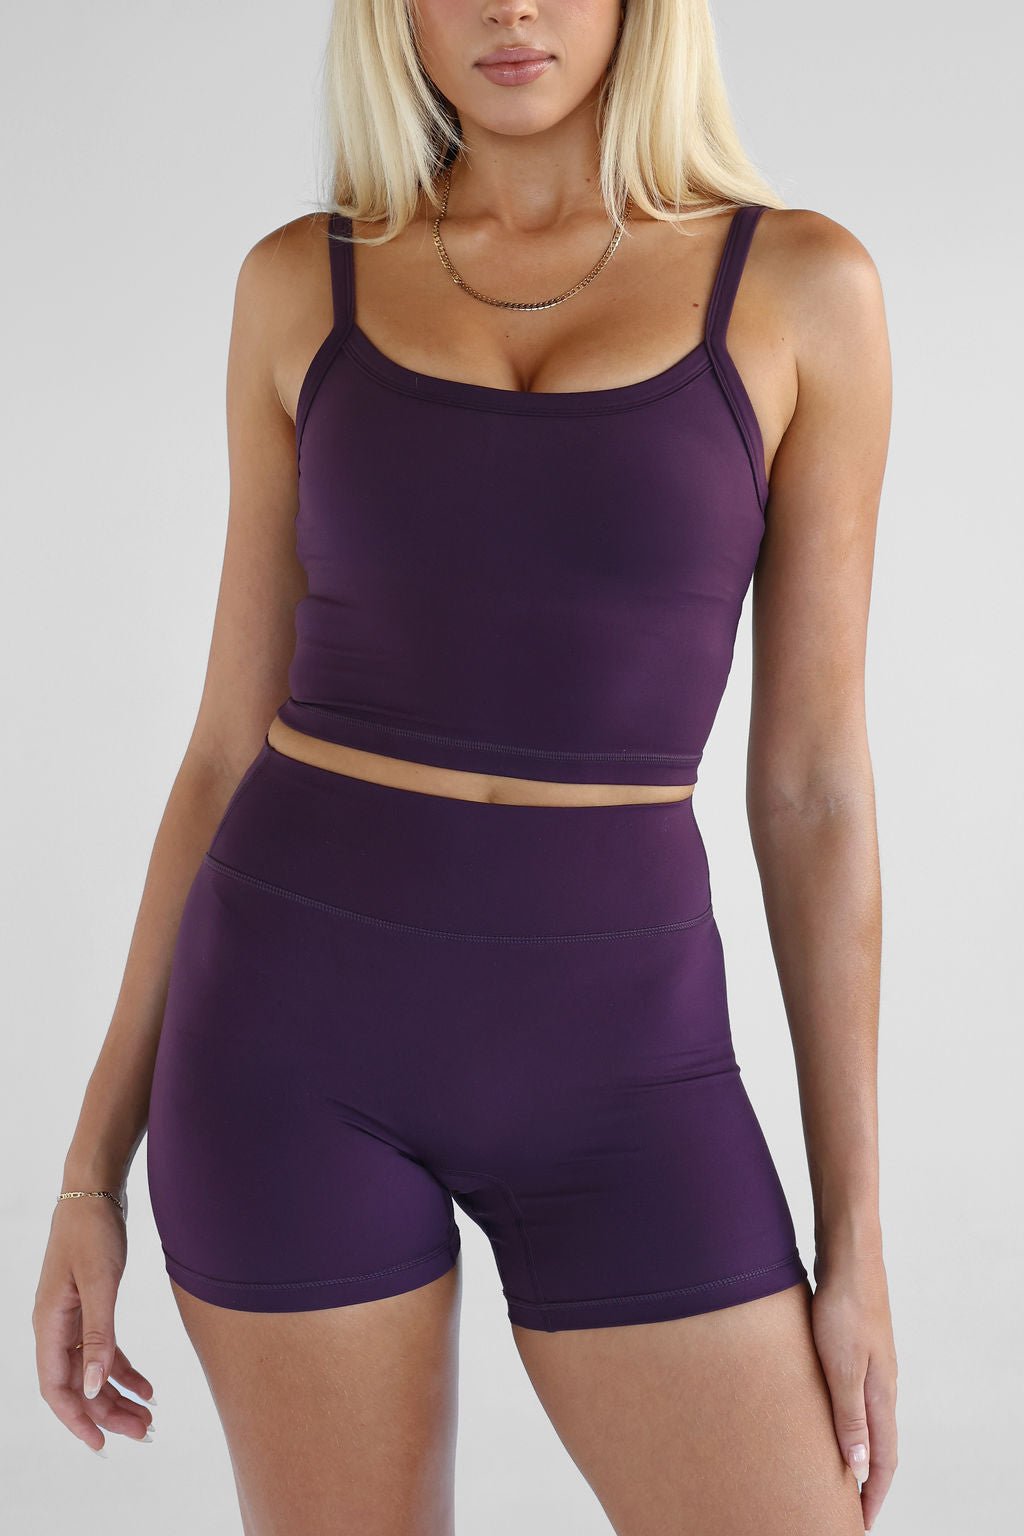 5" Signature Bike Shorts - Plum SHIPPING FROM 12/02 - LEELO ACTIVE